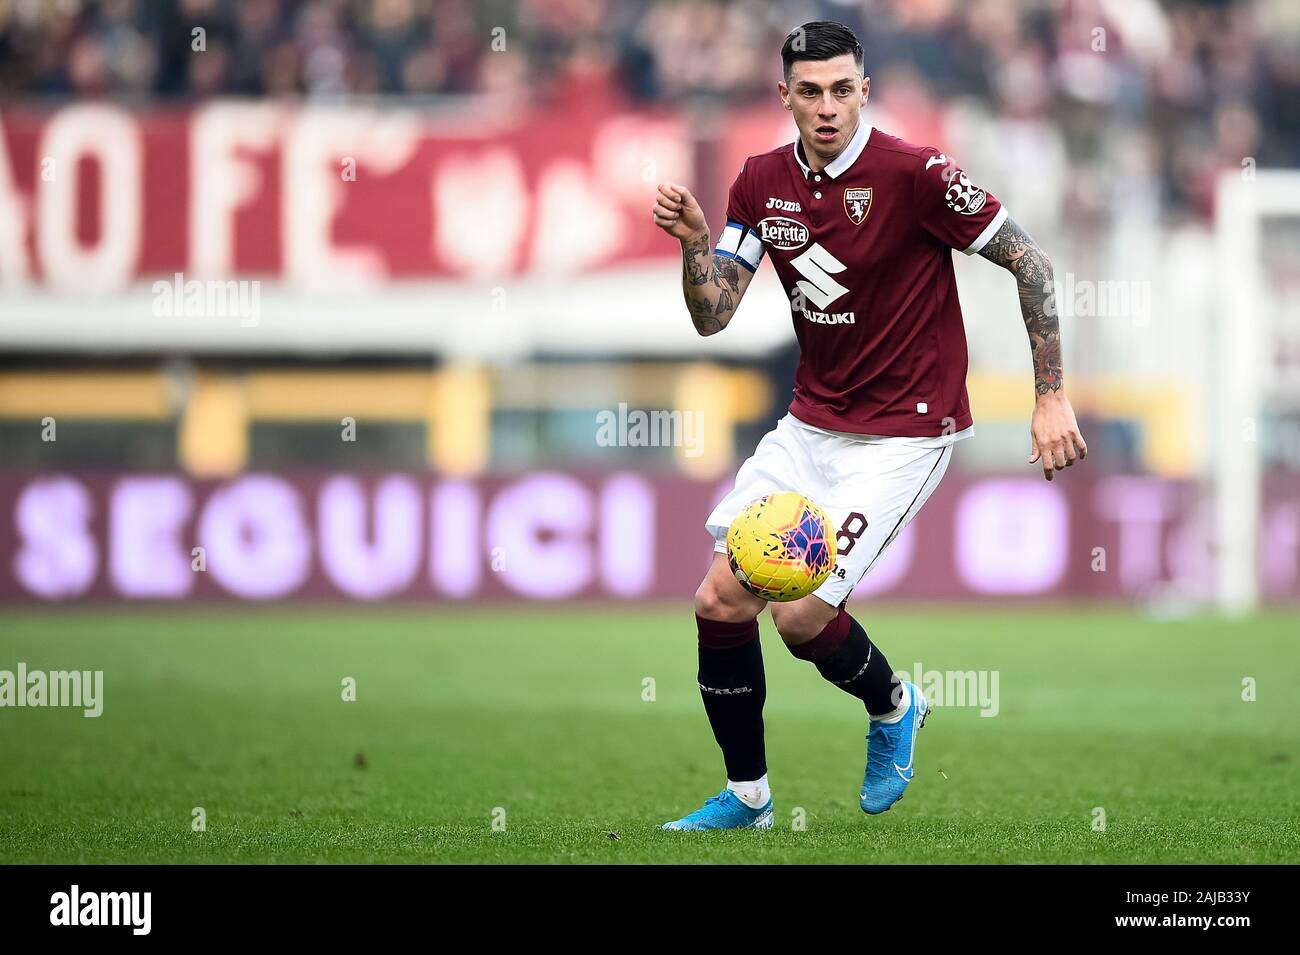 Turin, Italy - 08 December, 2019: Daniele Baselli of Torino FC in action  during the Serie A football match between Torino FC and ACF Fiorentina.  Torino FC won 2-1 over ACF Fiorentina.